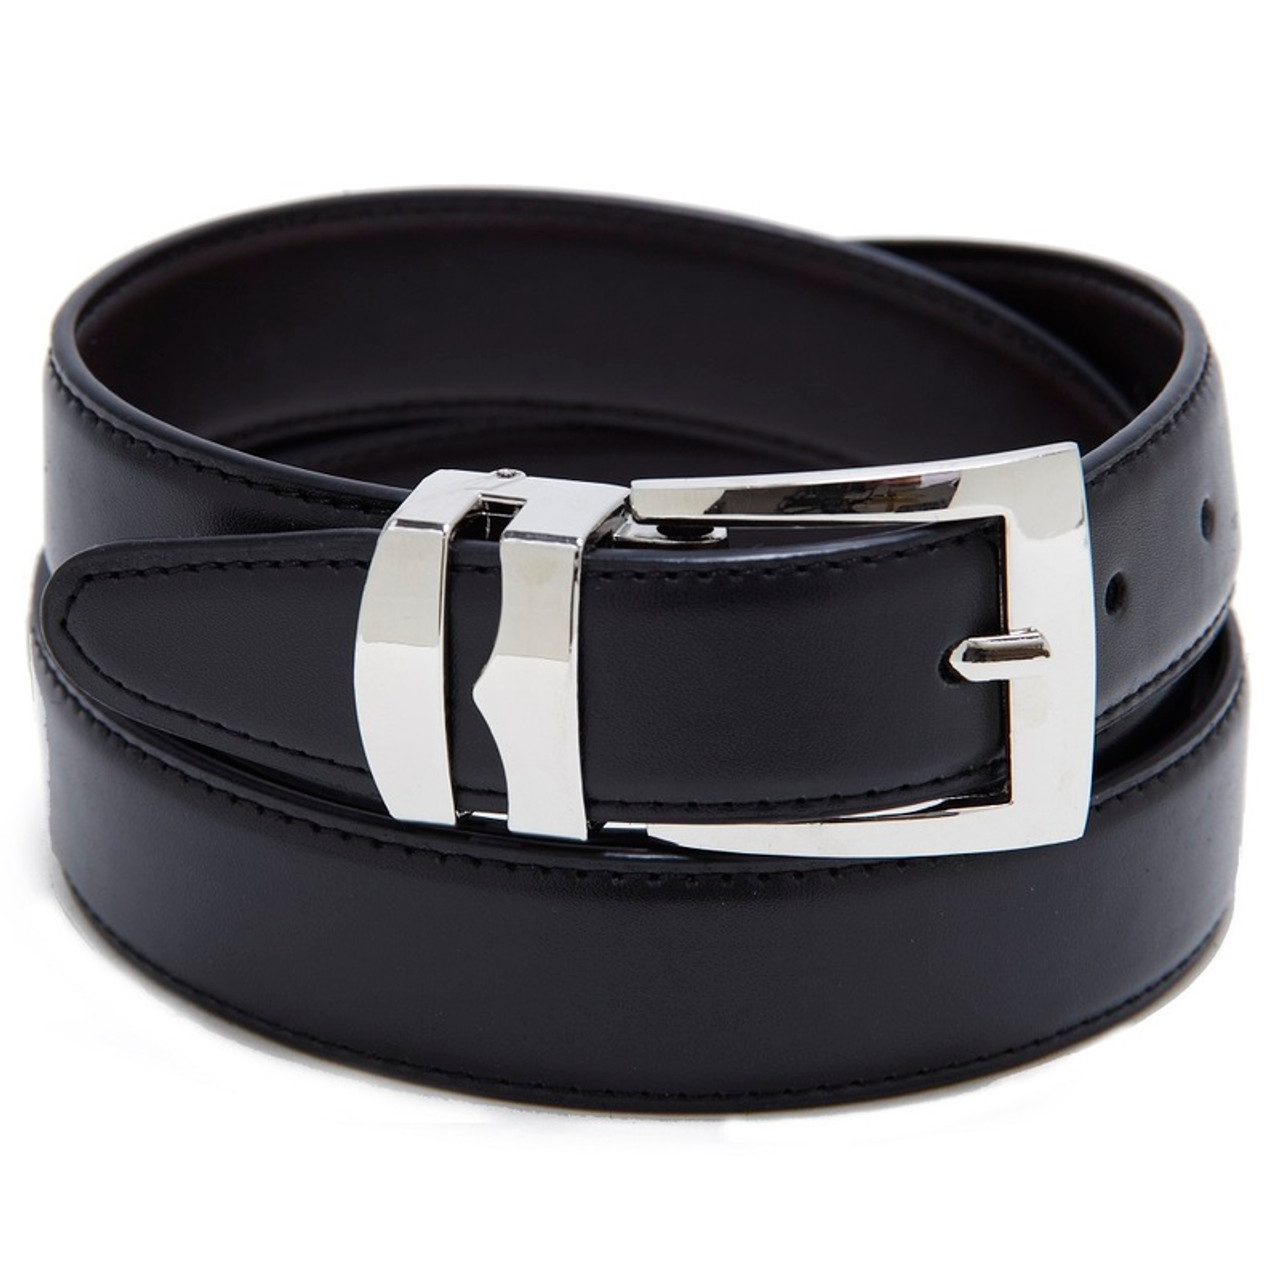 1.5” Wide Genuine Leather Belt with Double Prong Buckle